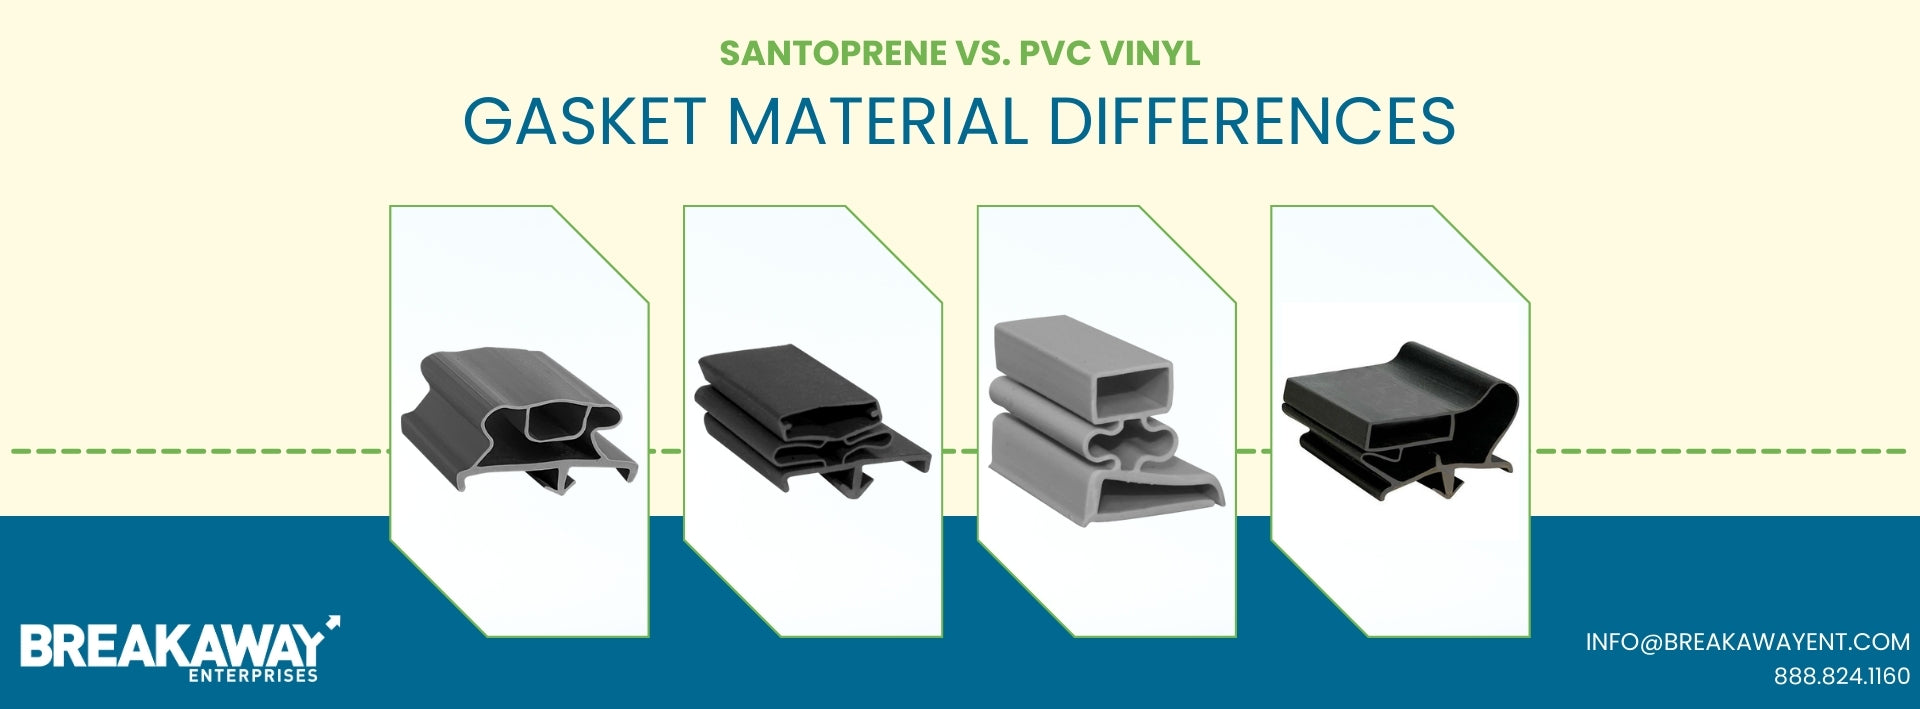 Santoprene vs. PVC Gaskets: Material Differences & Best-Use Applications for Commercial Refrigeration